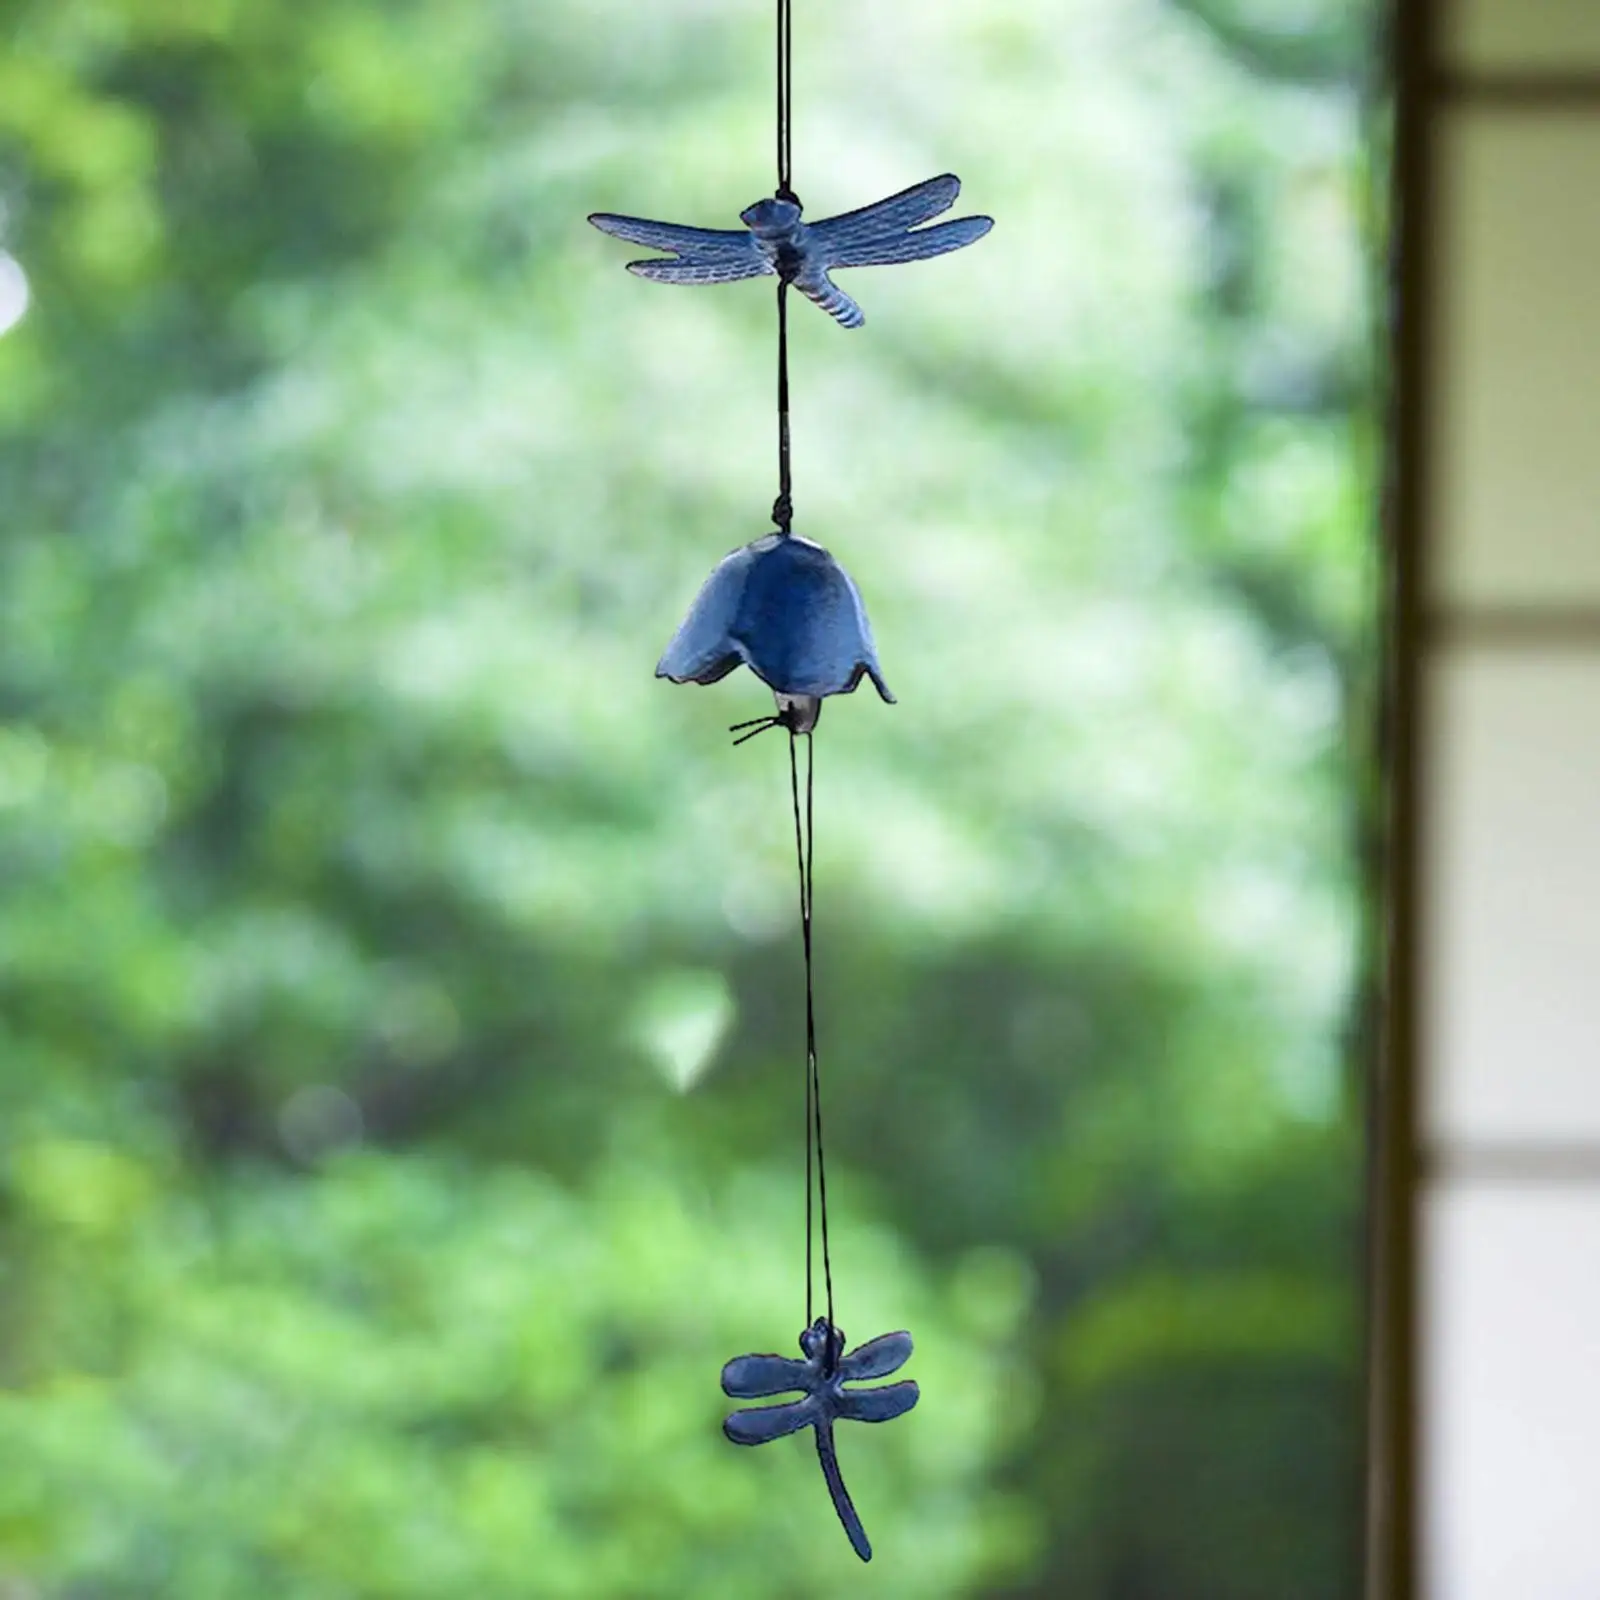 Japanese Wind Chime Wind Bell Dragonfly Decorative Windchime Cast Iron Wind Chime for Courtyard Outdoor Patio Door Decoration